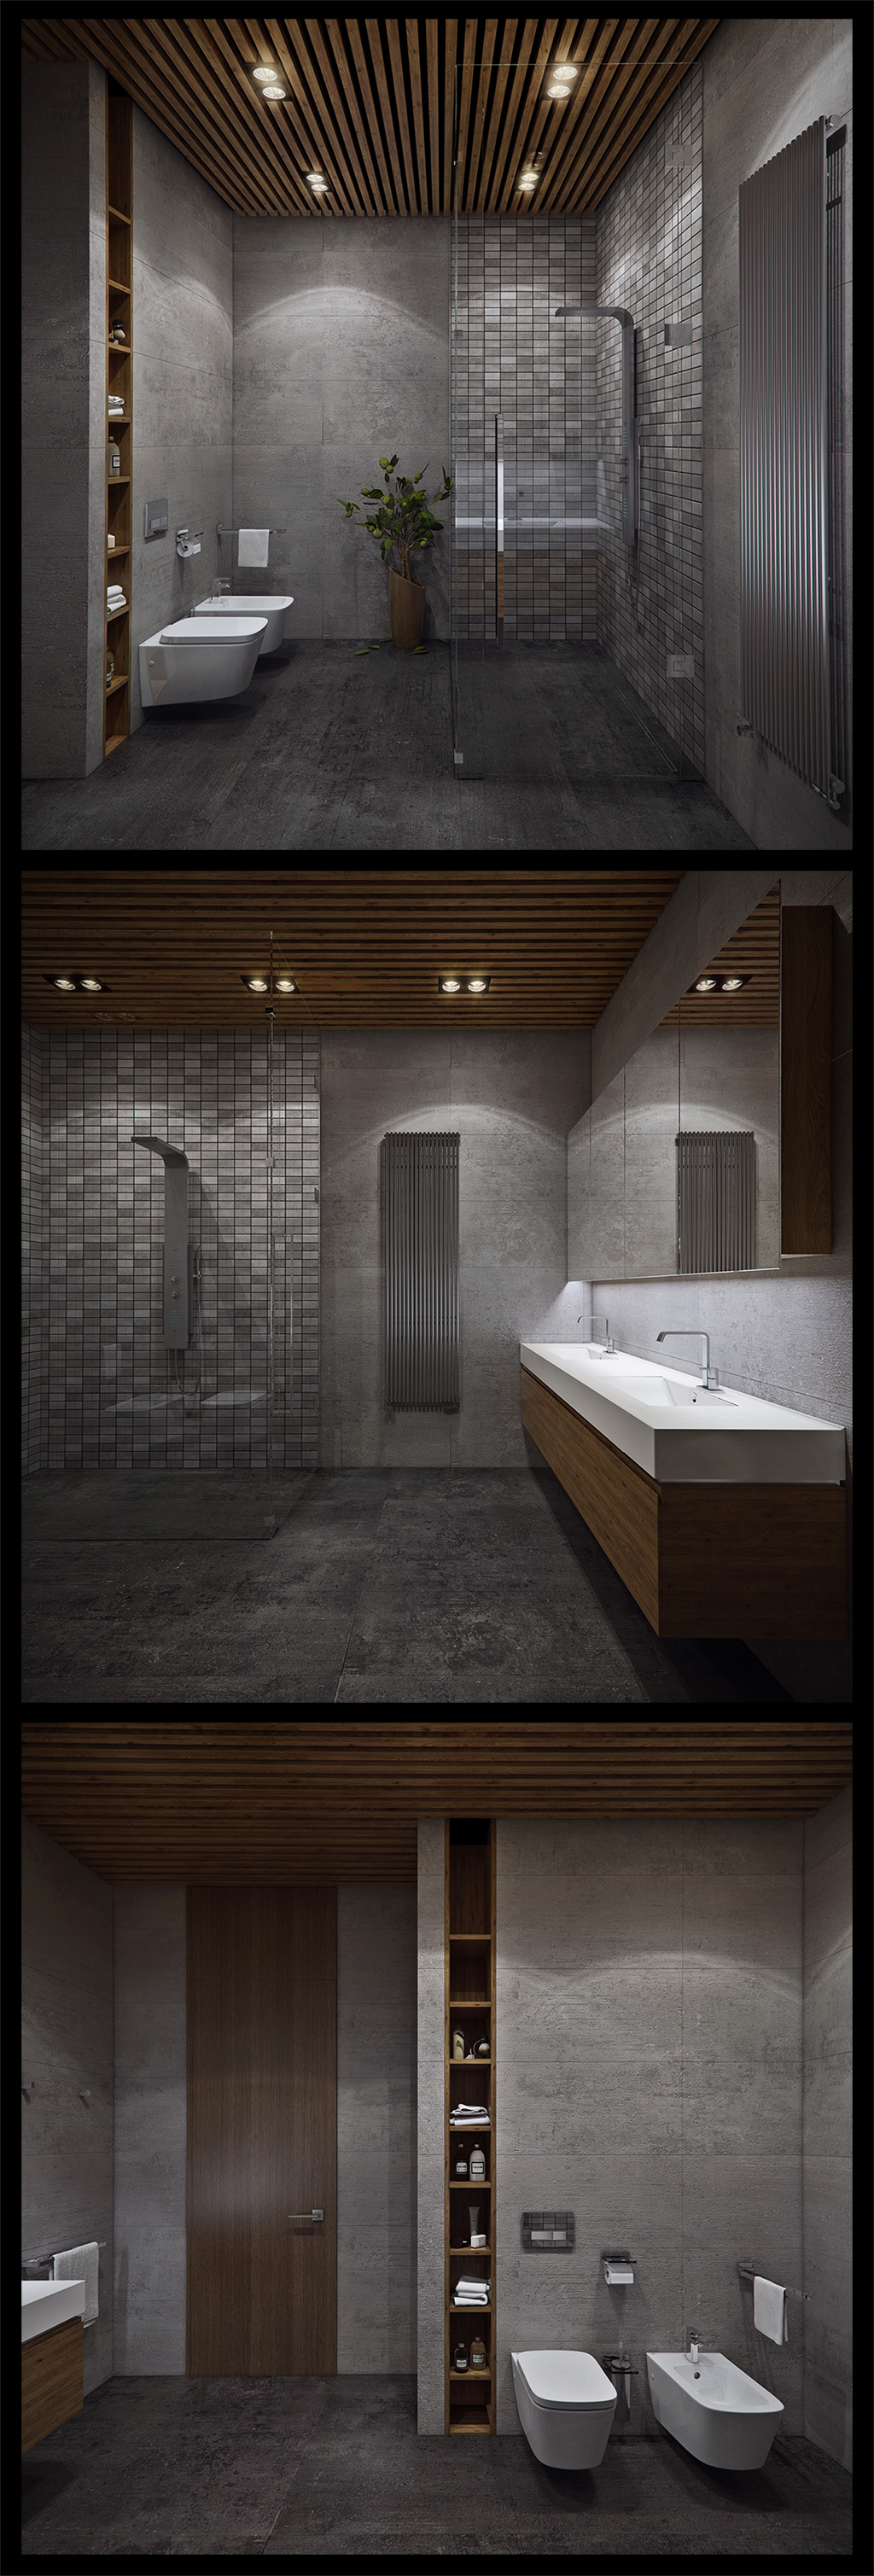 contemporary gray bathroom "width =" 1024 "height =" 3018 "srcset =" https://mileray.com/wp-content/uploads/2020/05/1588515552_517_Contemporary-Bathroom-Designs-Exposed-Gray-and-White-Color-Decor-Look.jpg 1024w, https: // myfashionos. com / wp-content / uploads / 2016/10 / Multiple-Owners-3-102x300.jpg 102w, https://mileray.com/wp-content/uploads/2016/10/Multiple-Owners-3-768x2264.jpg 768w, https://mileray.com/wp-content/uploads/2016/10/Multiple-Owners-3-347x1024.jpg 347w, https://mileray.com/wp-content/uploads/2016/10/Multiple -Owners-3-696x2051.jpg 696w, https://mileray.com/wp-content/uploads/2016/10/Multiple-Owners-3-143x420.jpg 143w "Sizes =" (maximum width: 1024px) 100vw 1024px